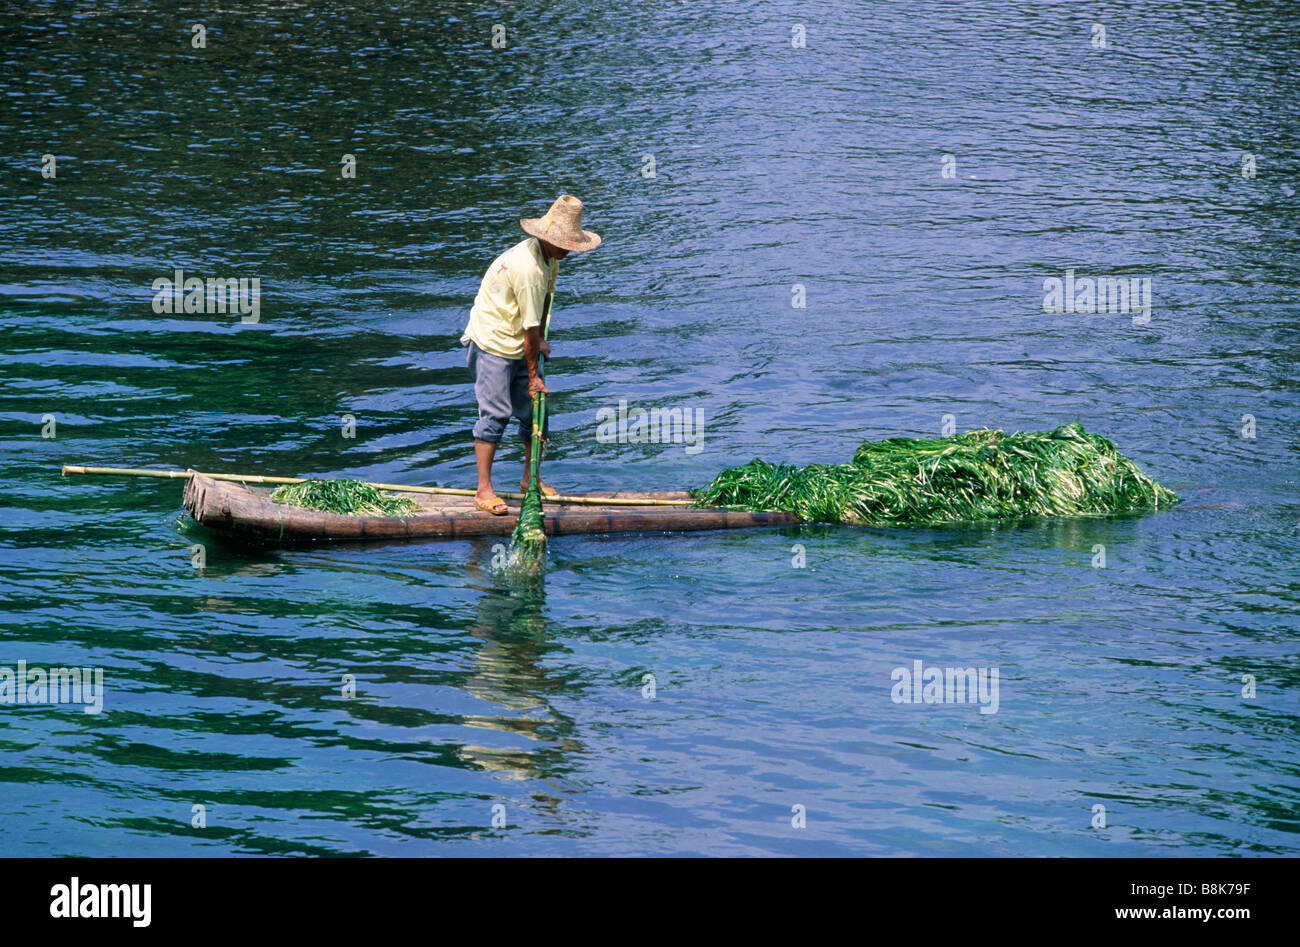 Man on bamboo raft On river Using pole to drag green weed plants from water  LI RIVER GUANGXI PROVINCE CHINA Stock Photo - Alamy